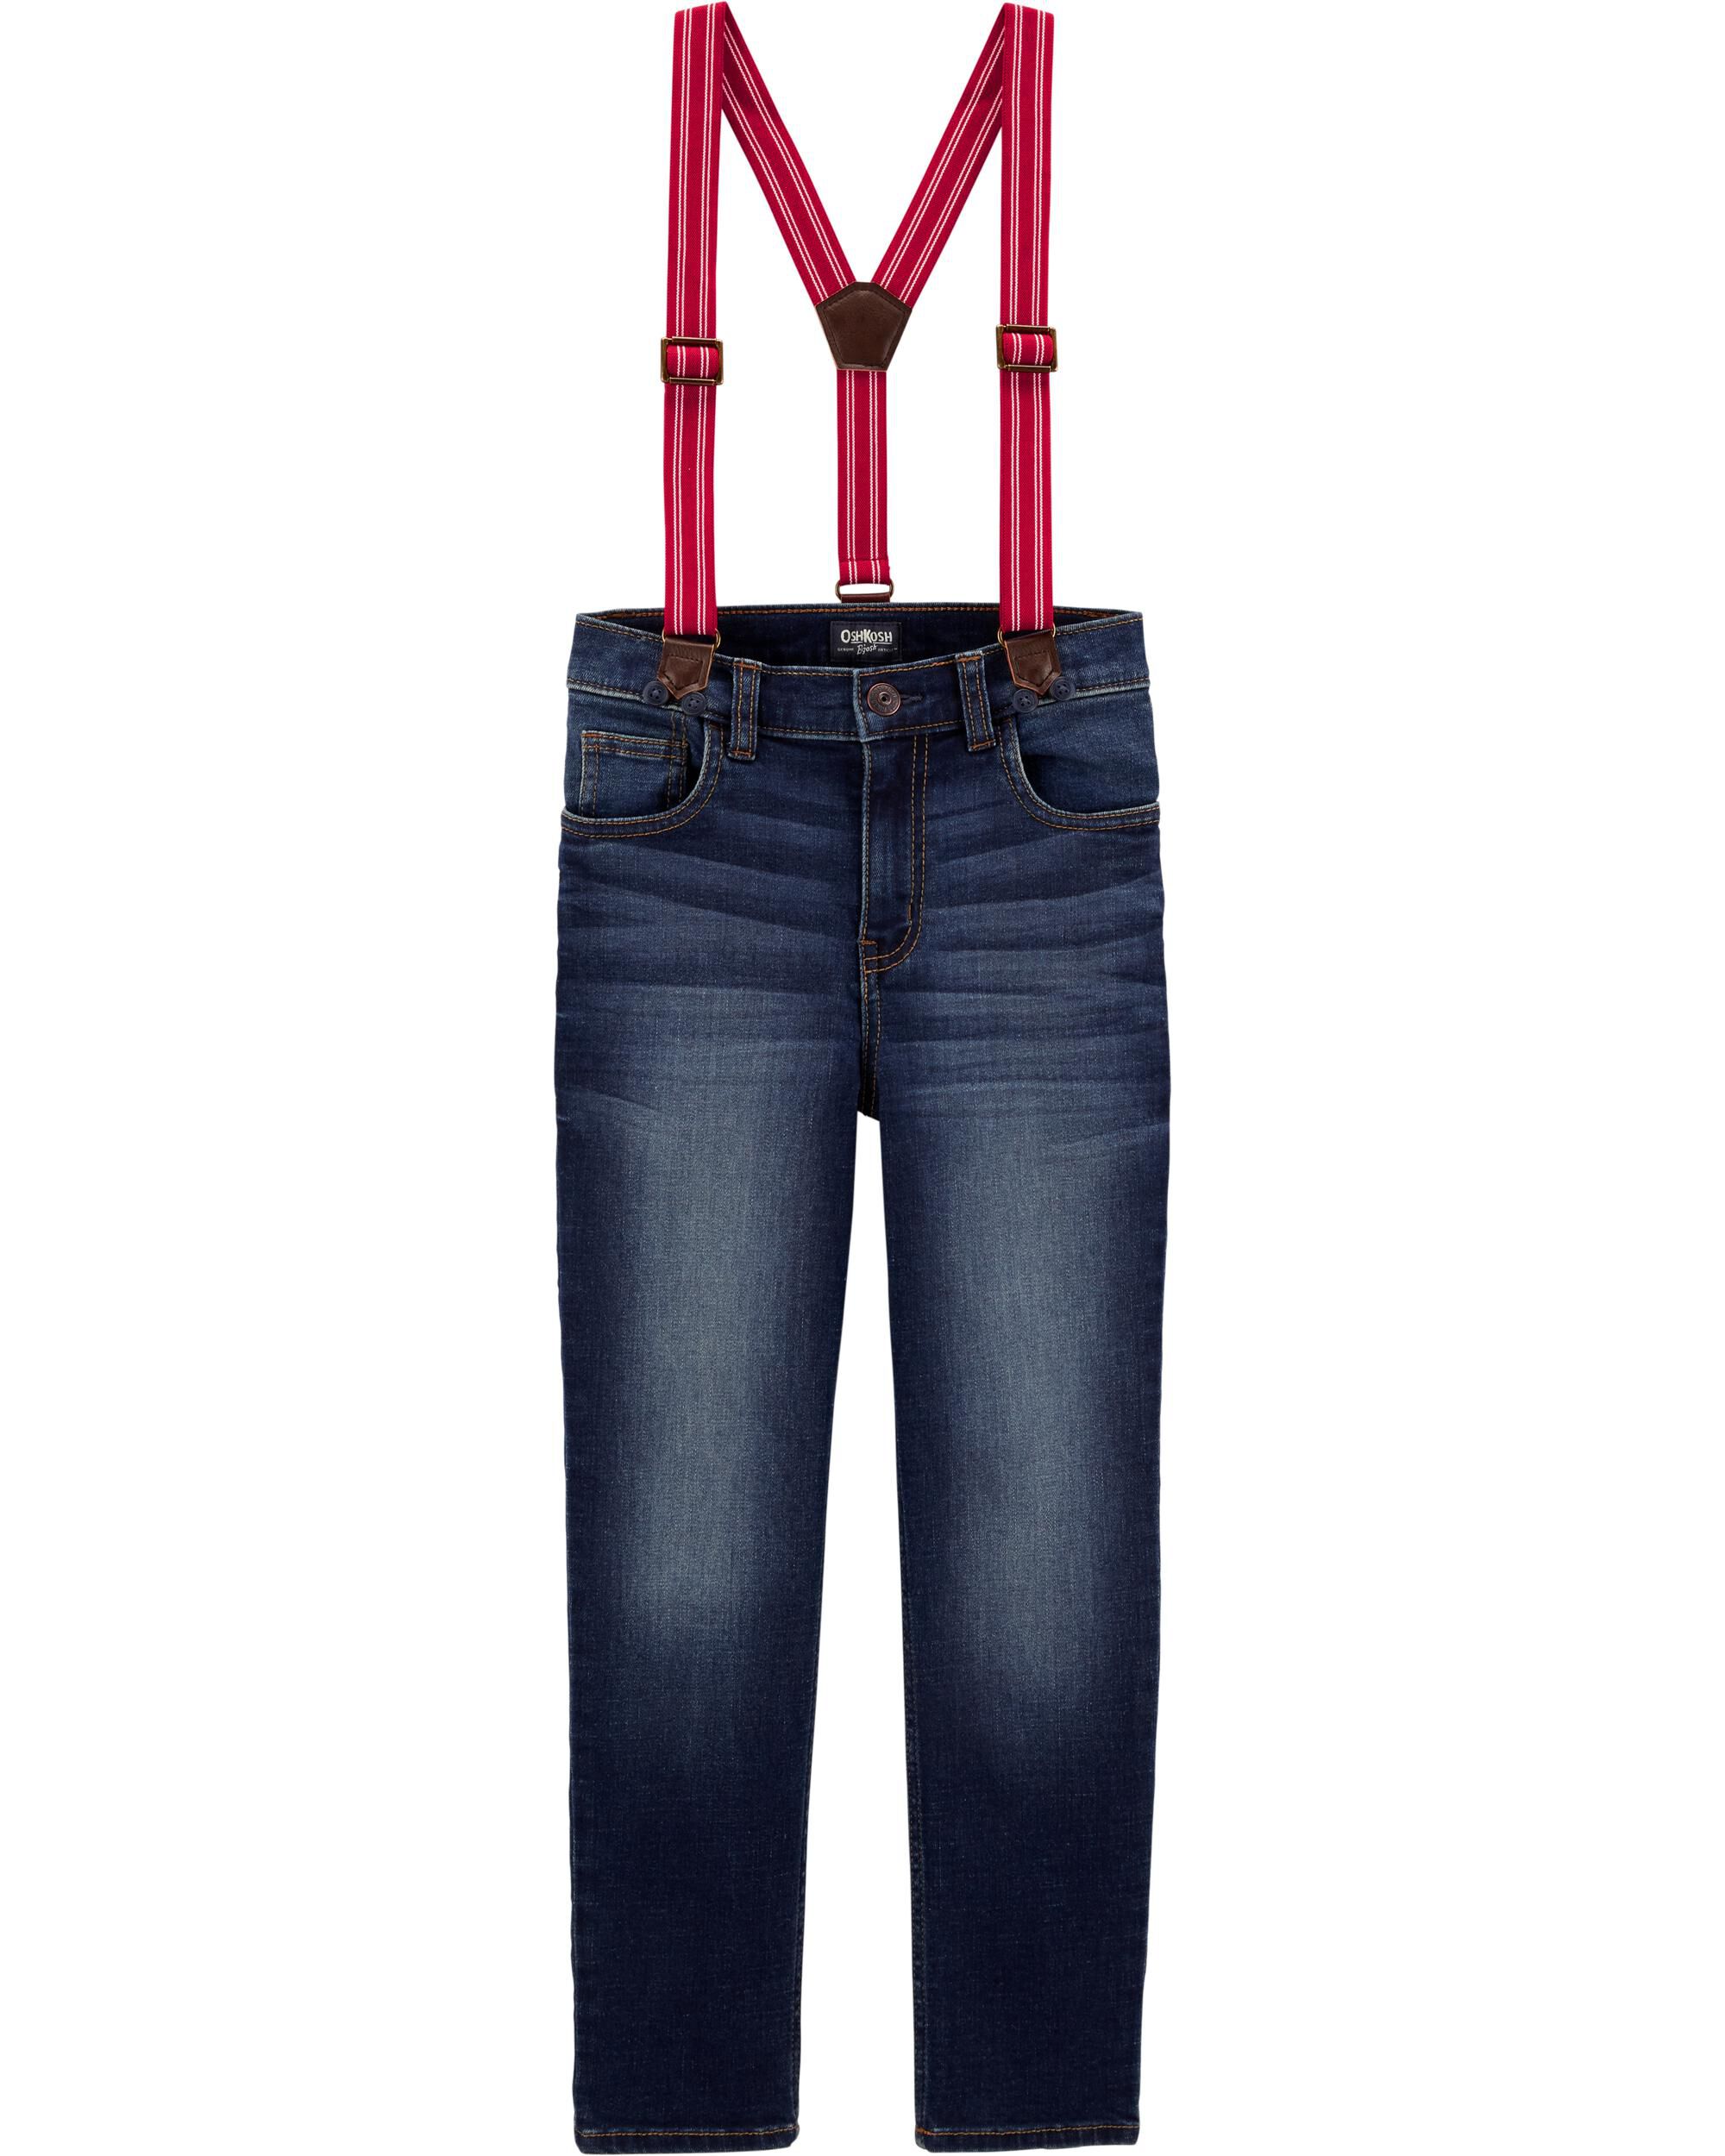 jersey lined jeans